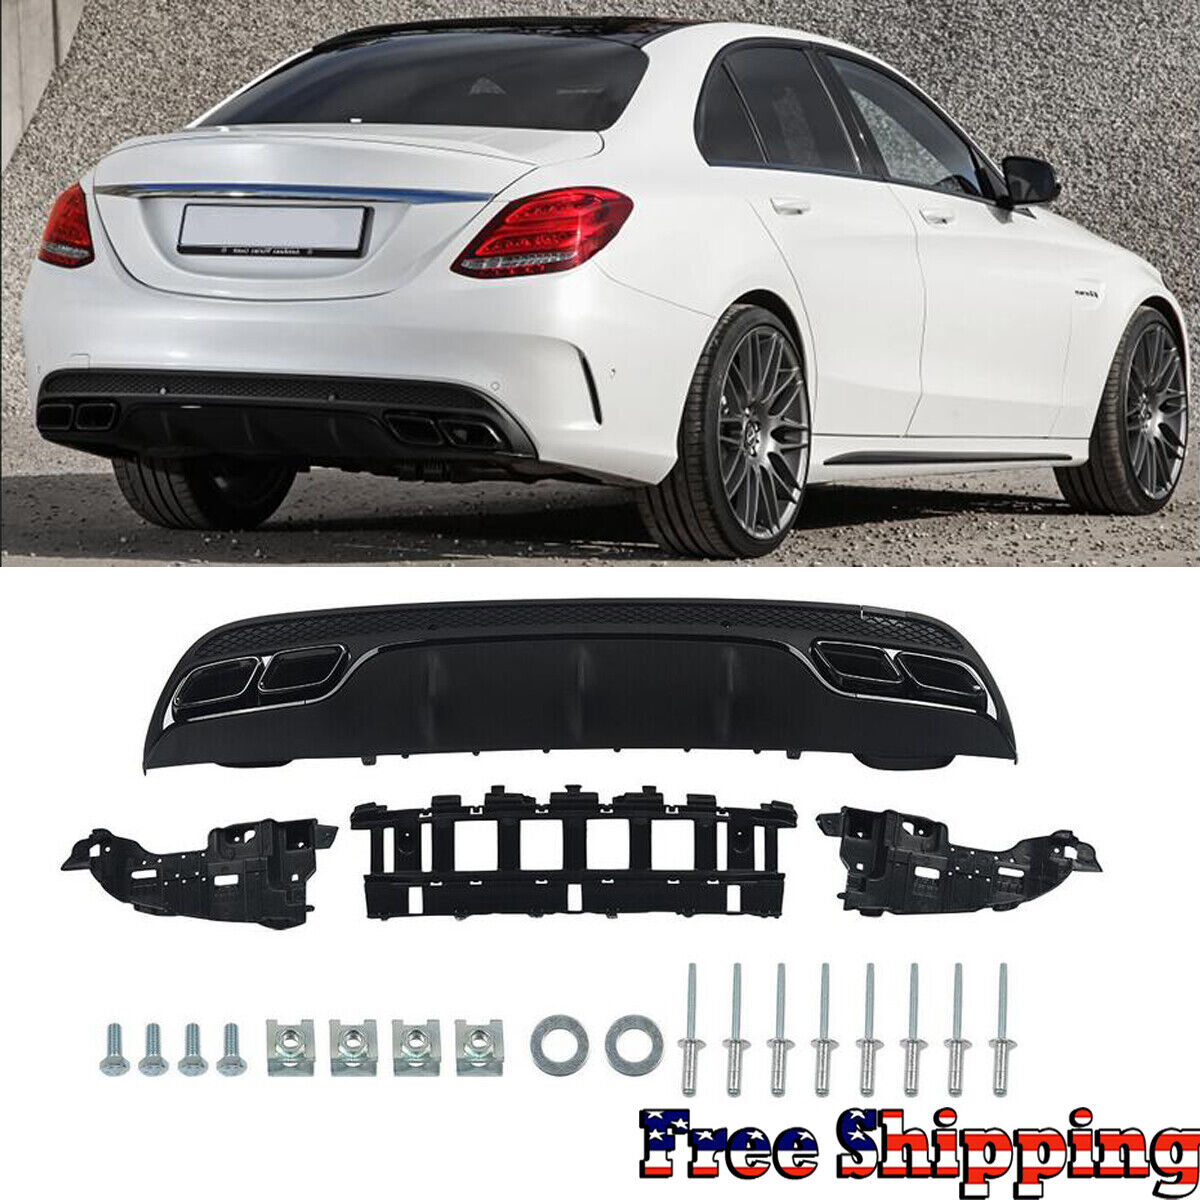 Rear Diffuser + Exhaust Tips For Mercedes Benz W205 C300 C350 AMG-Line 2014-19